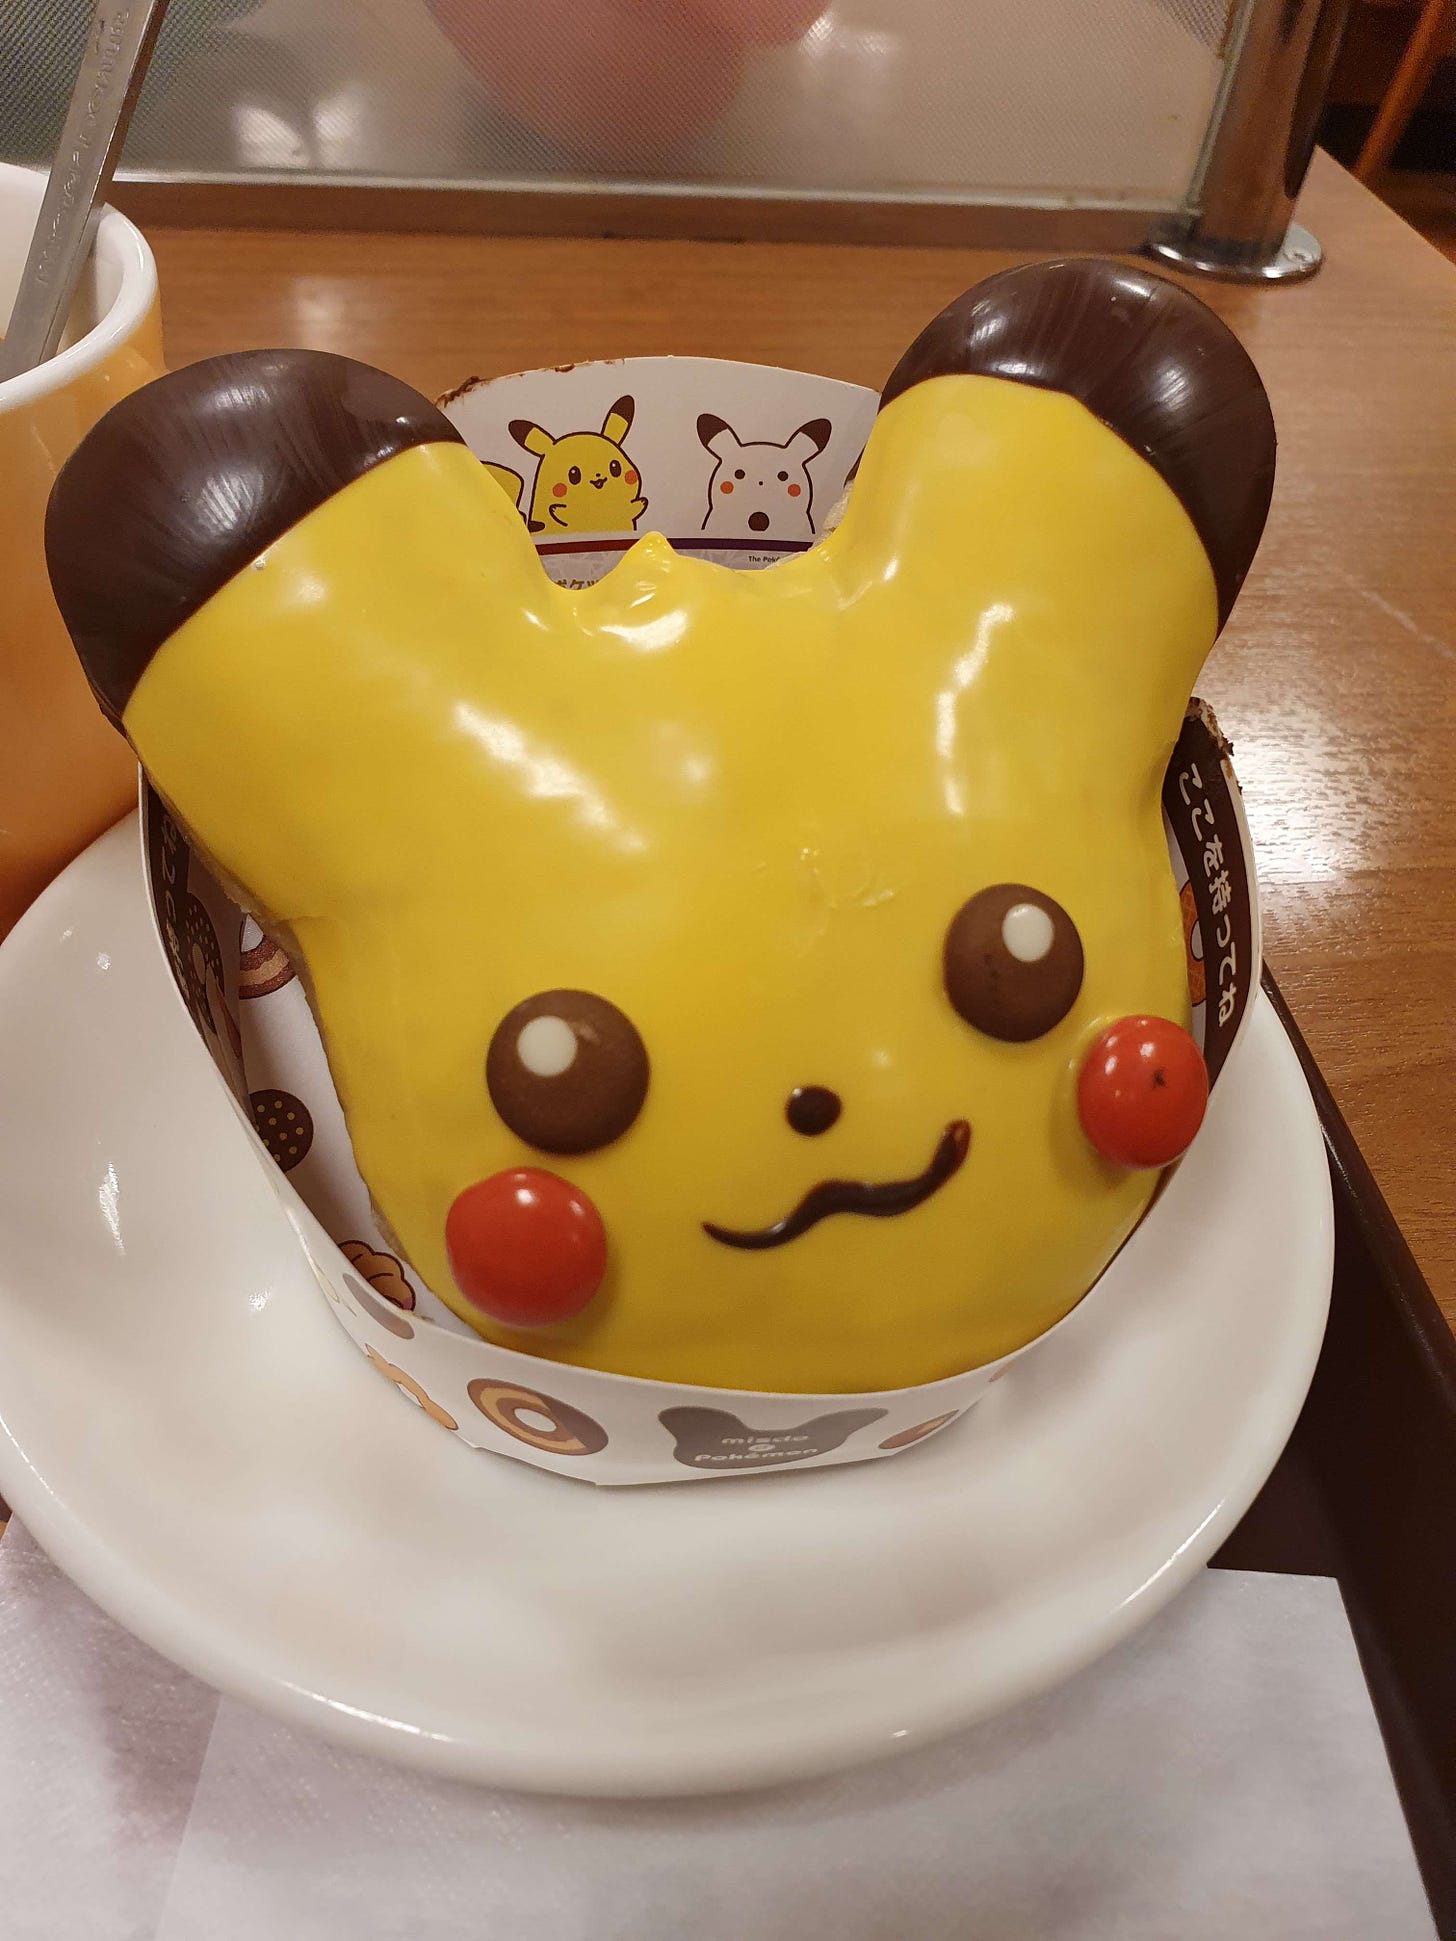 A delicious looking Pikachu doughnut, almost too good to eat!